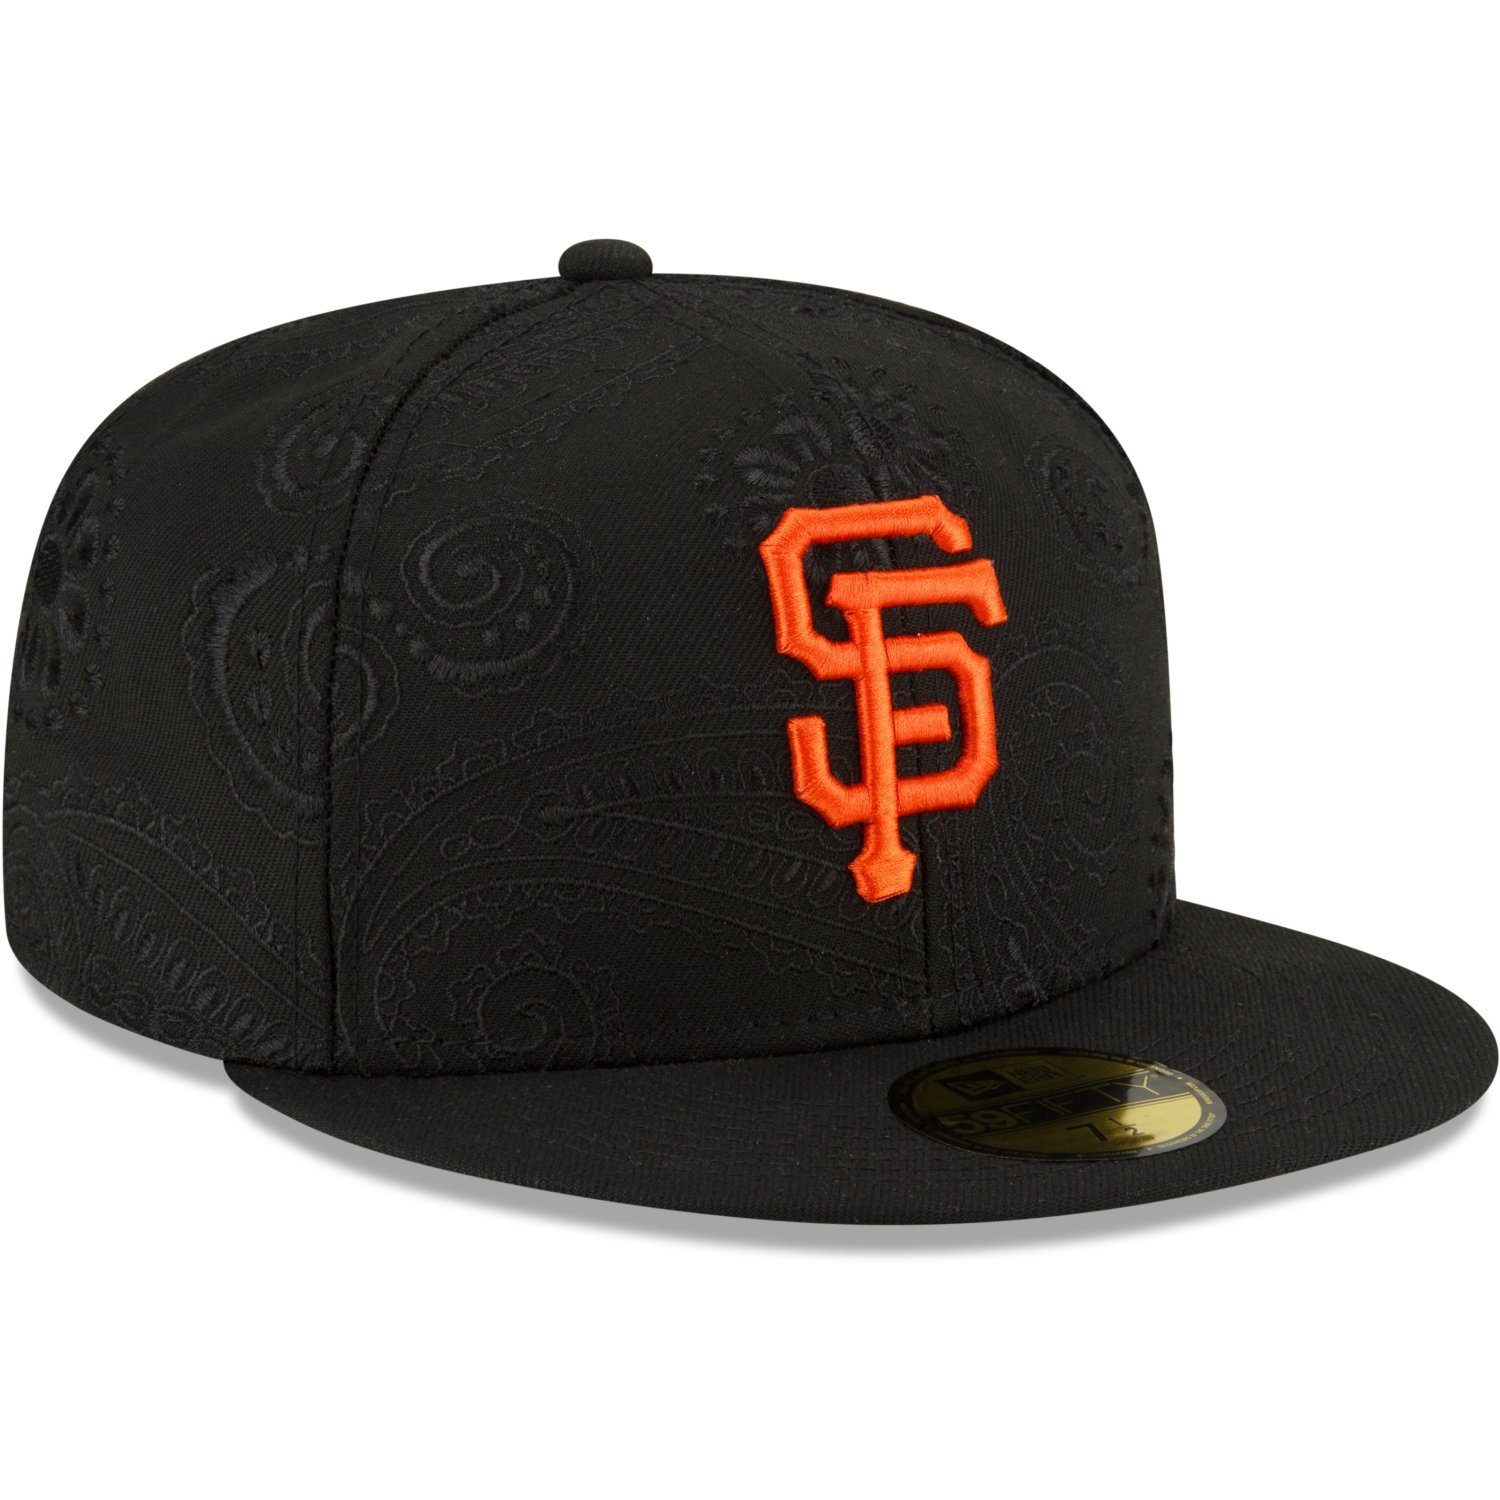 PAISLEY Fitted Giants Cap SWIRL Era New San Francisco 59Fifty